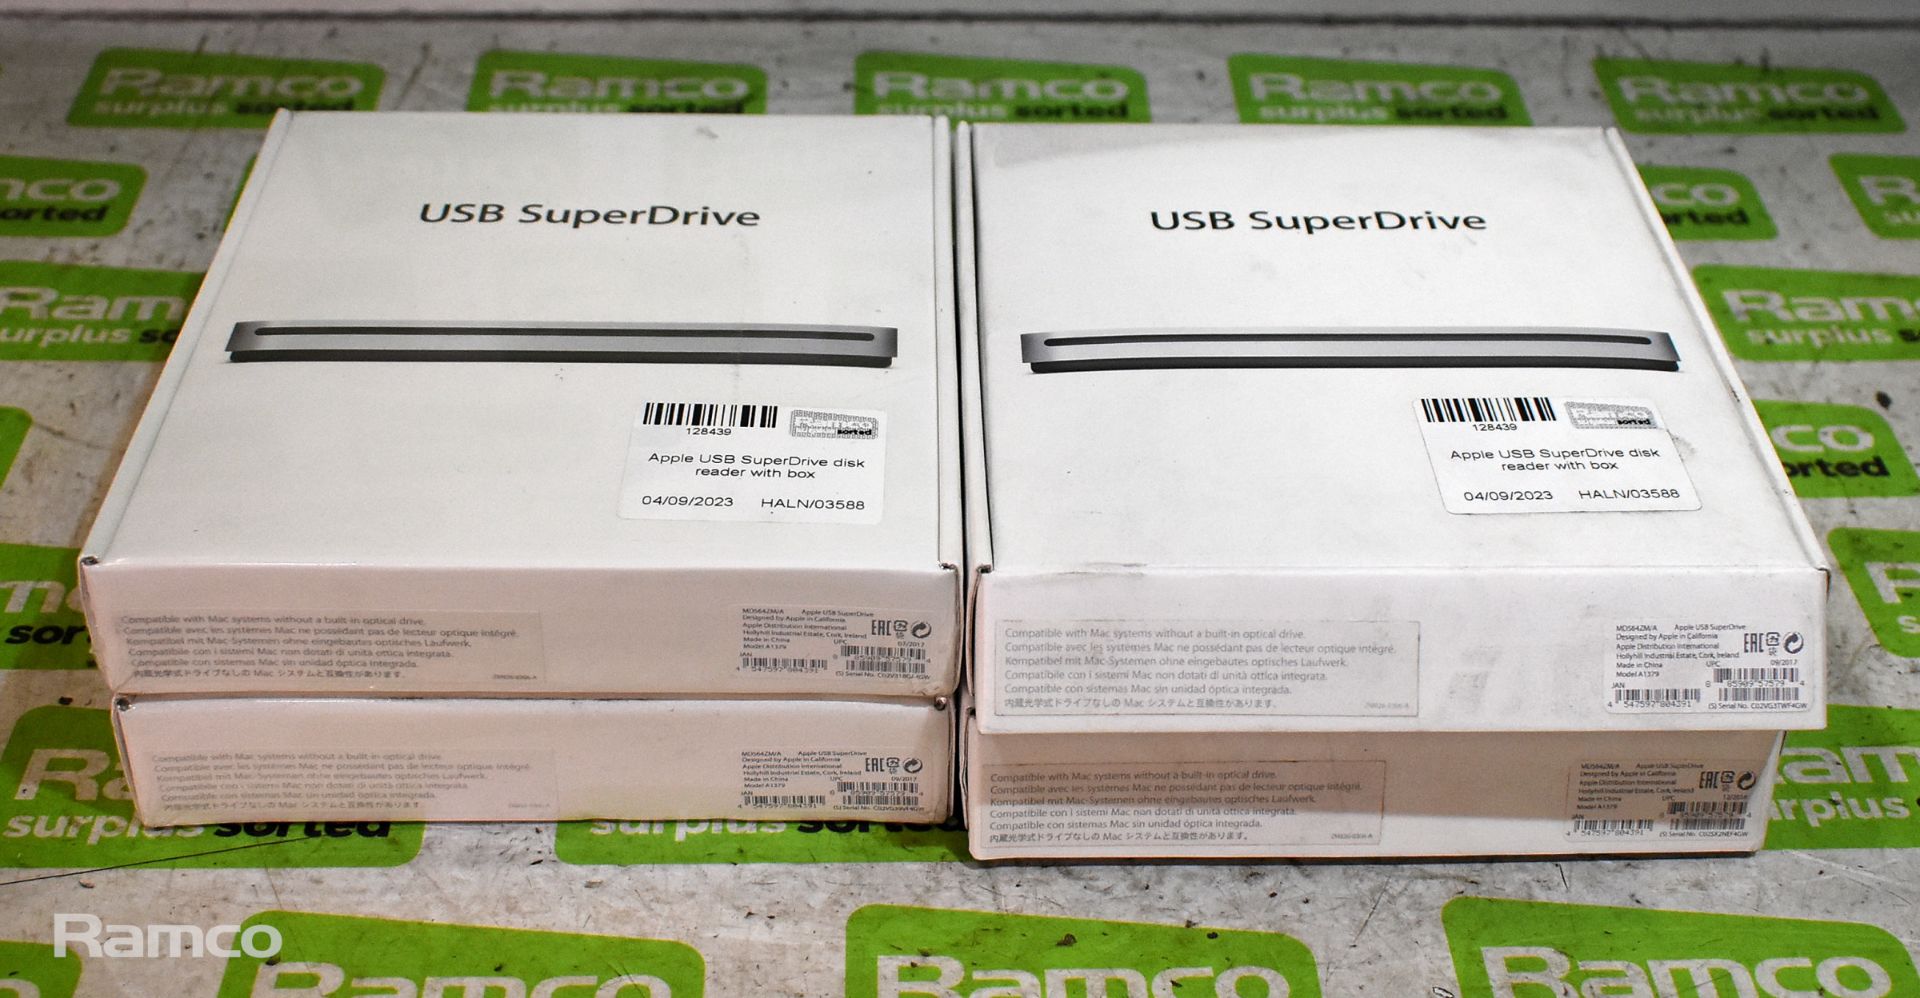 4x Apple A1379 USB SuperDrive disk readers with box - Image 5 of 7